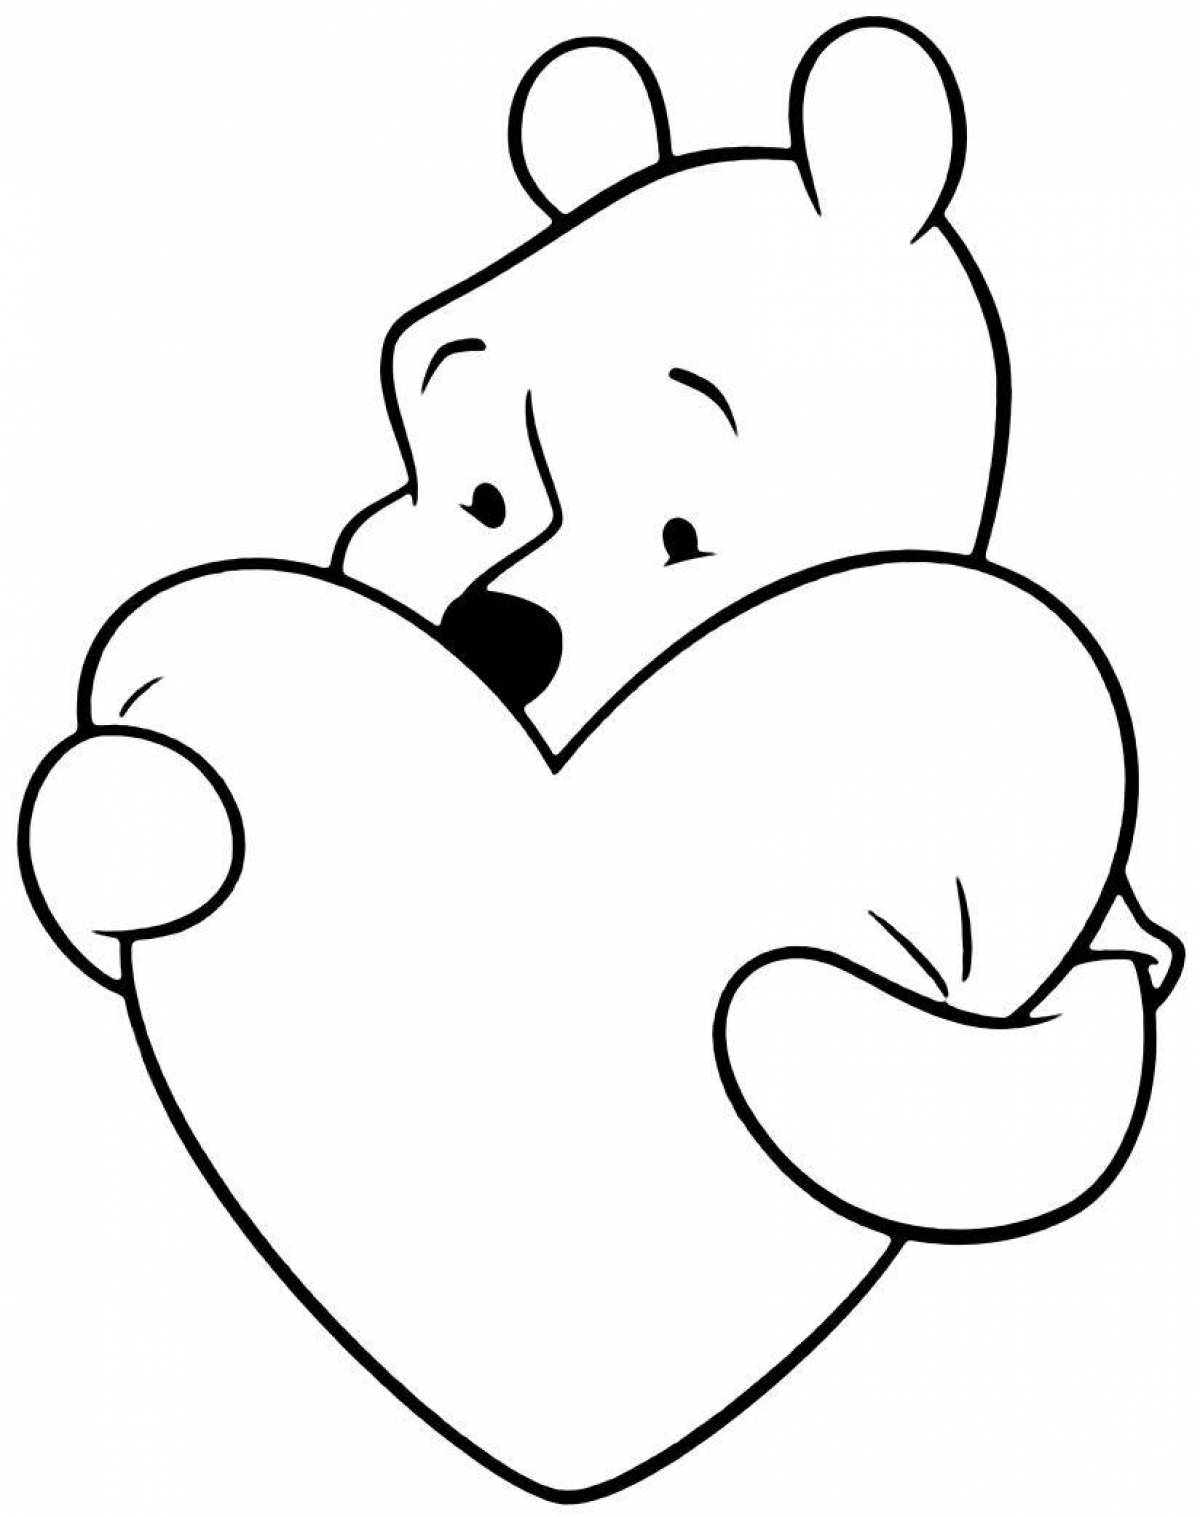 Nice bear with a heart coloring book